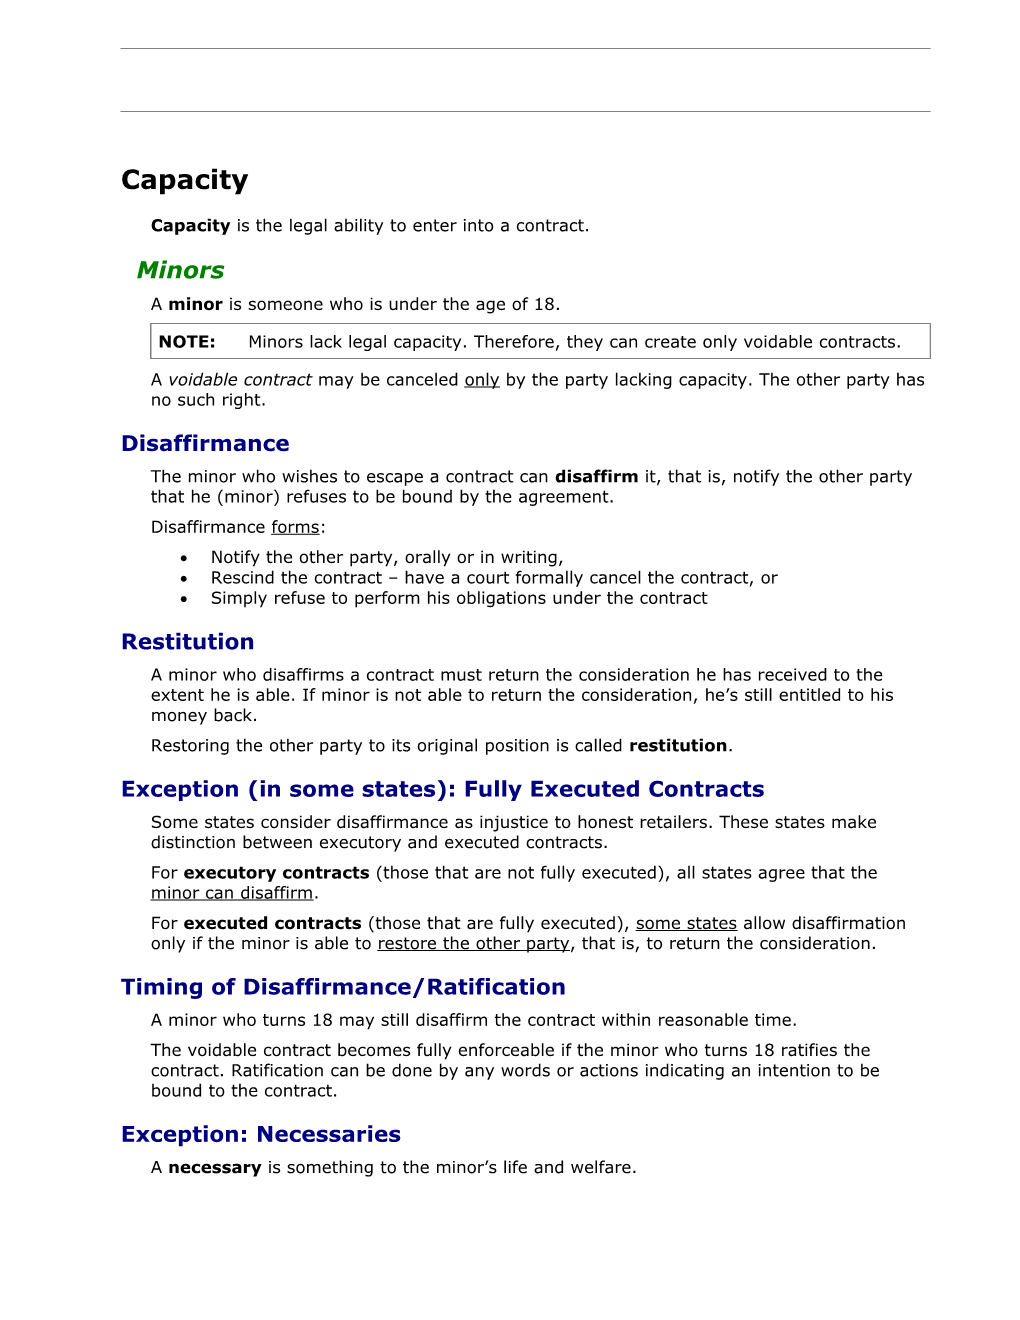 Capacity Is the Legal Ability to Enter Into a Contract